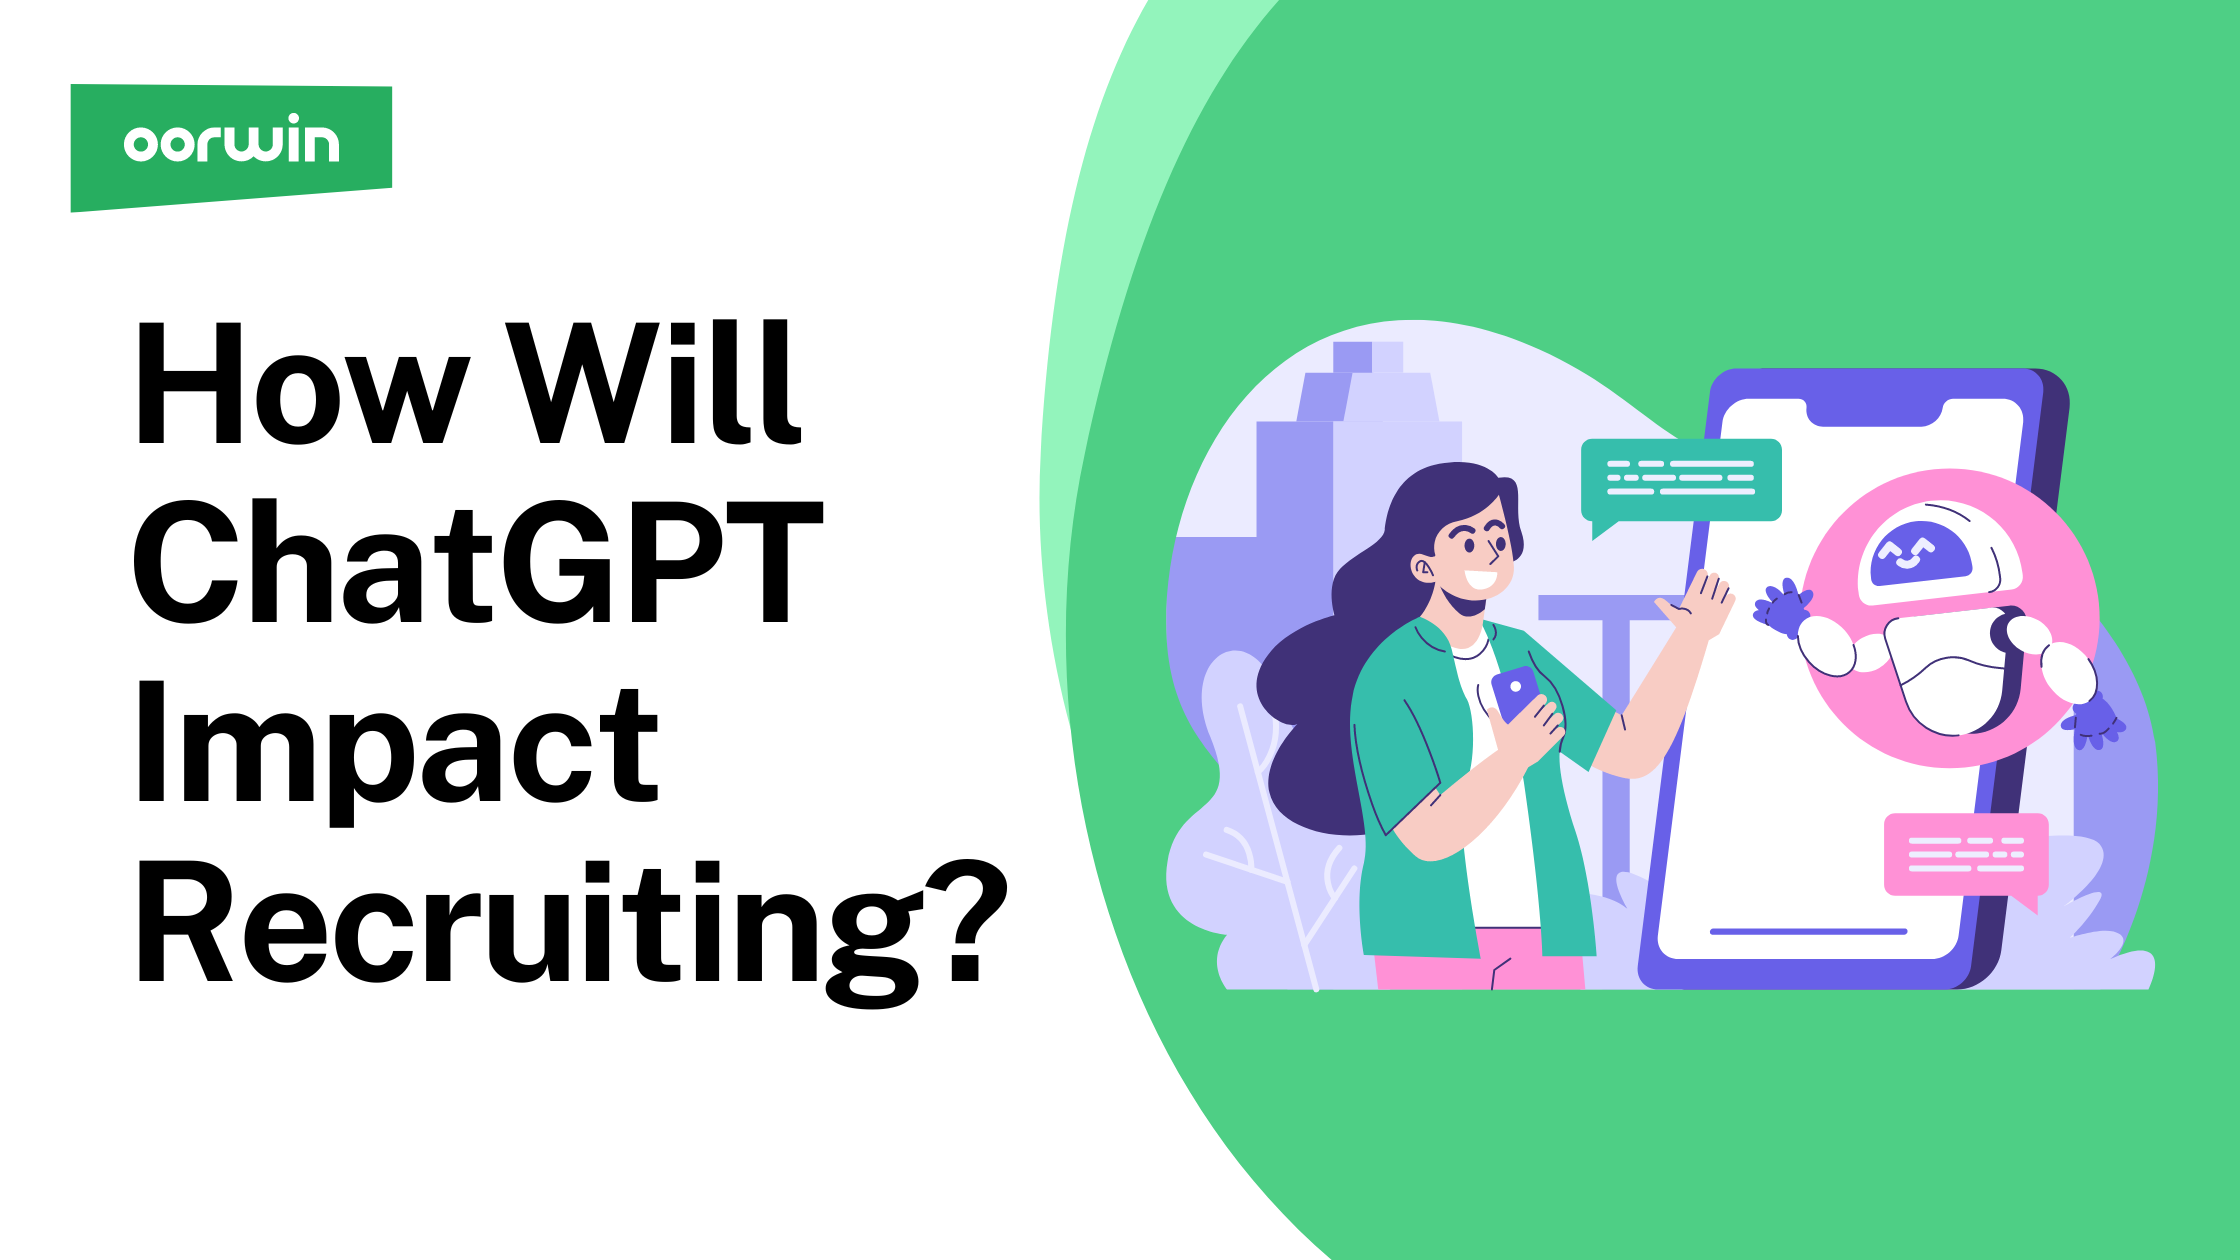 How Will ChatGPT Impact Recruiting